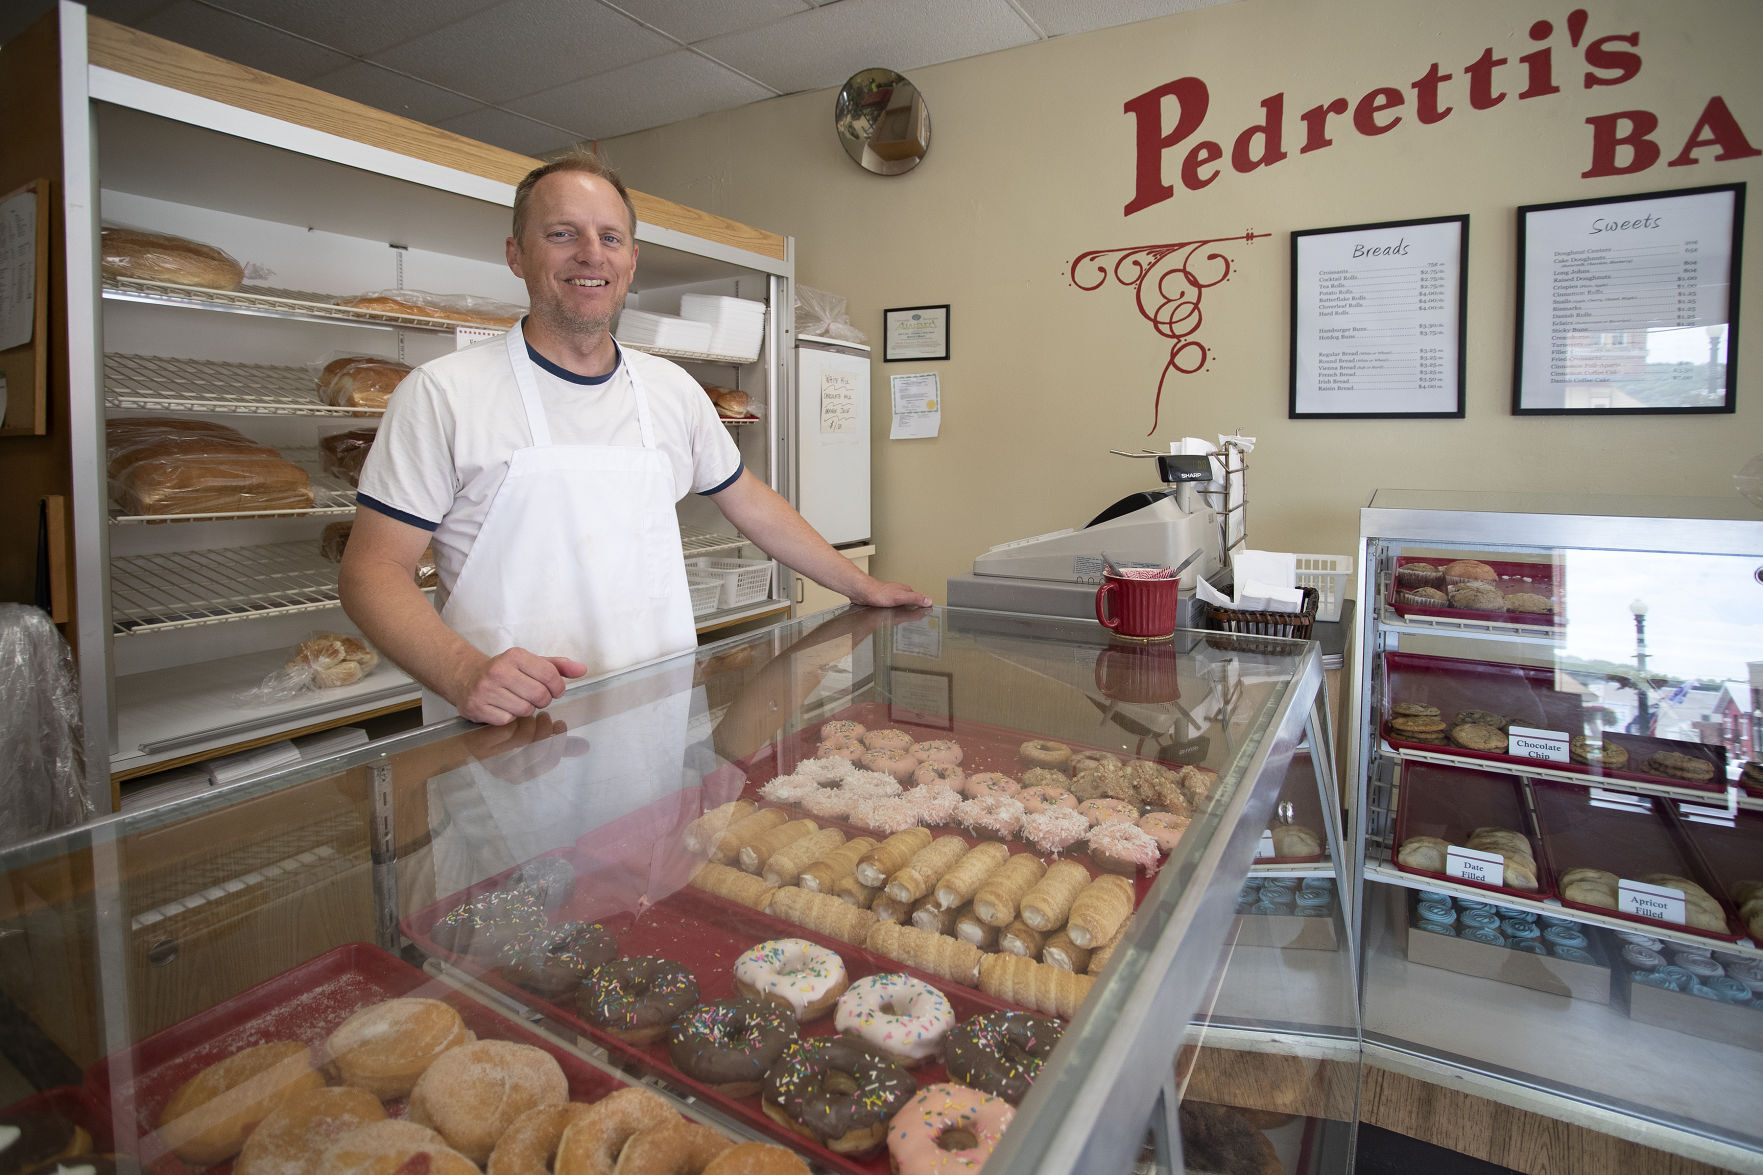 Christopher Reimer is the third generation to own Pedrettis Bakery in Elkader, Iowa. Elkader will be celebrating its 175th Anniversary and Founders Day Celebration on Saturday, June 19.    PHOTO CREDIT: Stephen Gassman